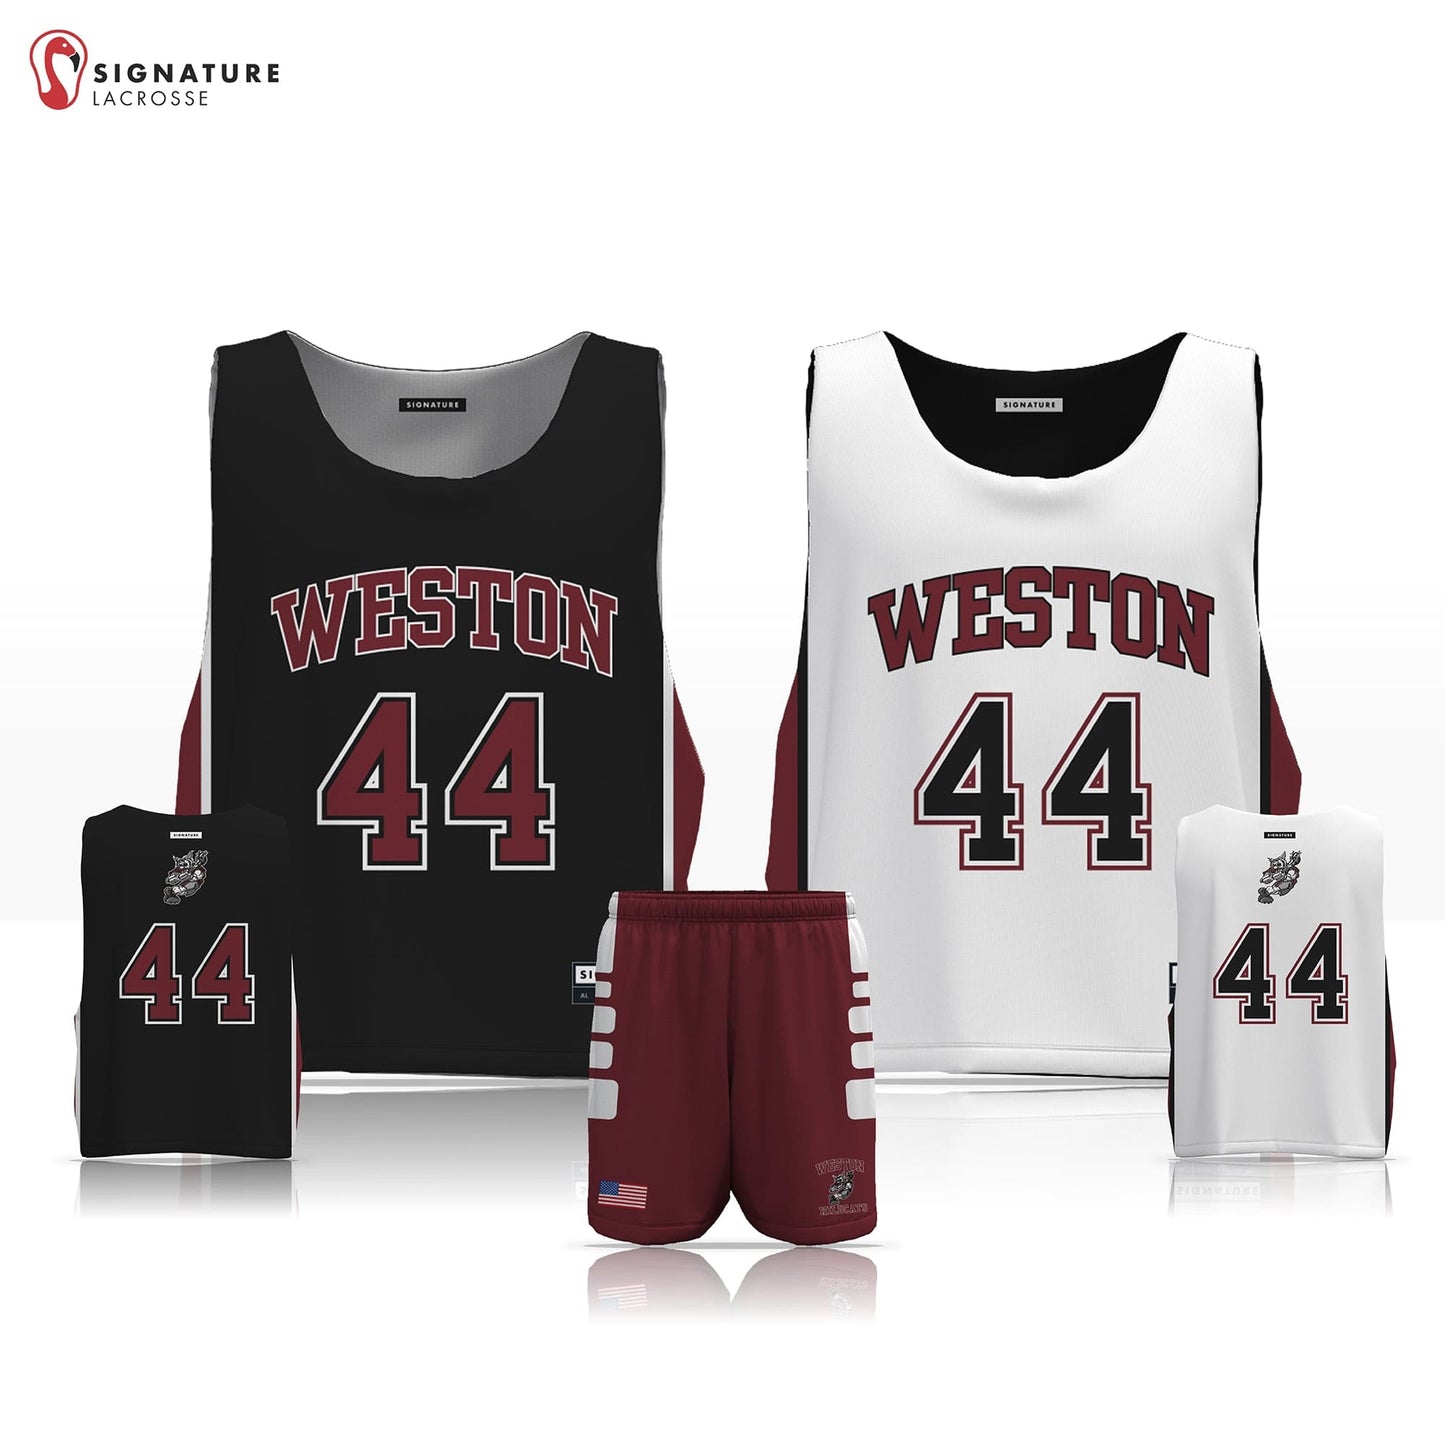 Weston Youth Lacrosse Men's 2 Piece Player Game Package: Grade 3-4 Signature Lacrosse